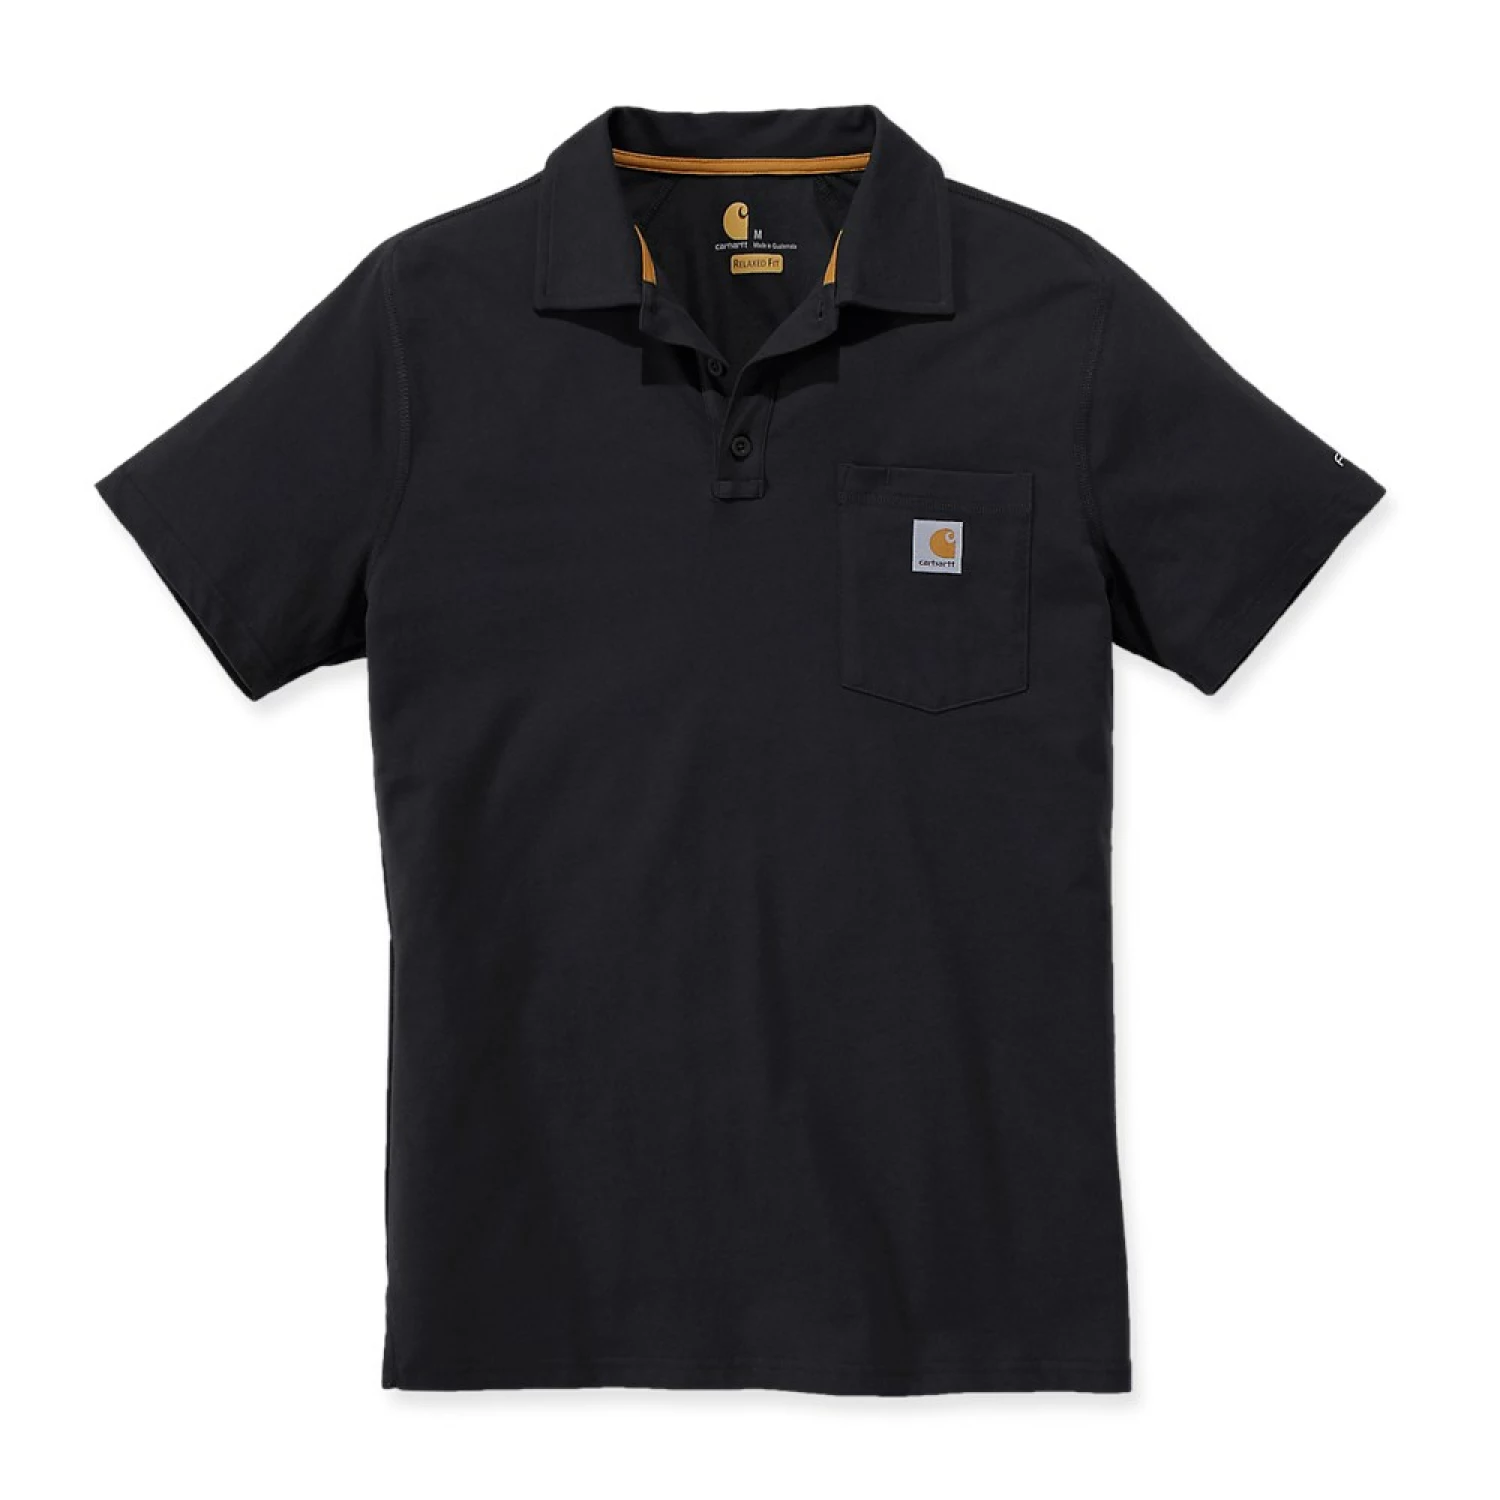 Carhartt 103569 Force Cotton Delmont Pocket Polo - Relaxed Fit - Black - M